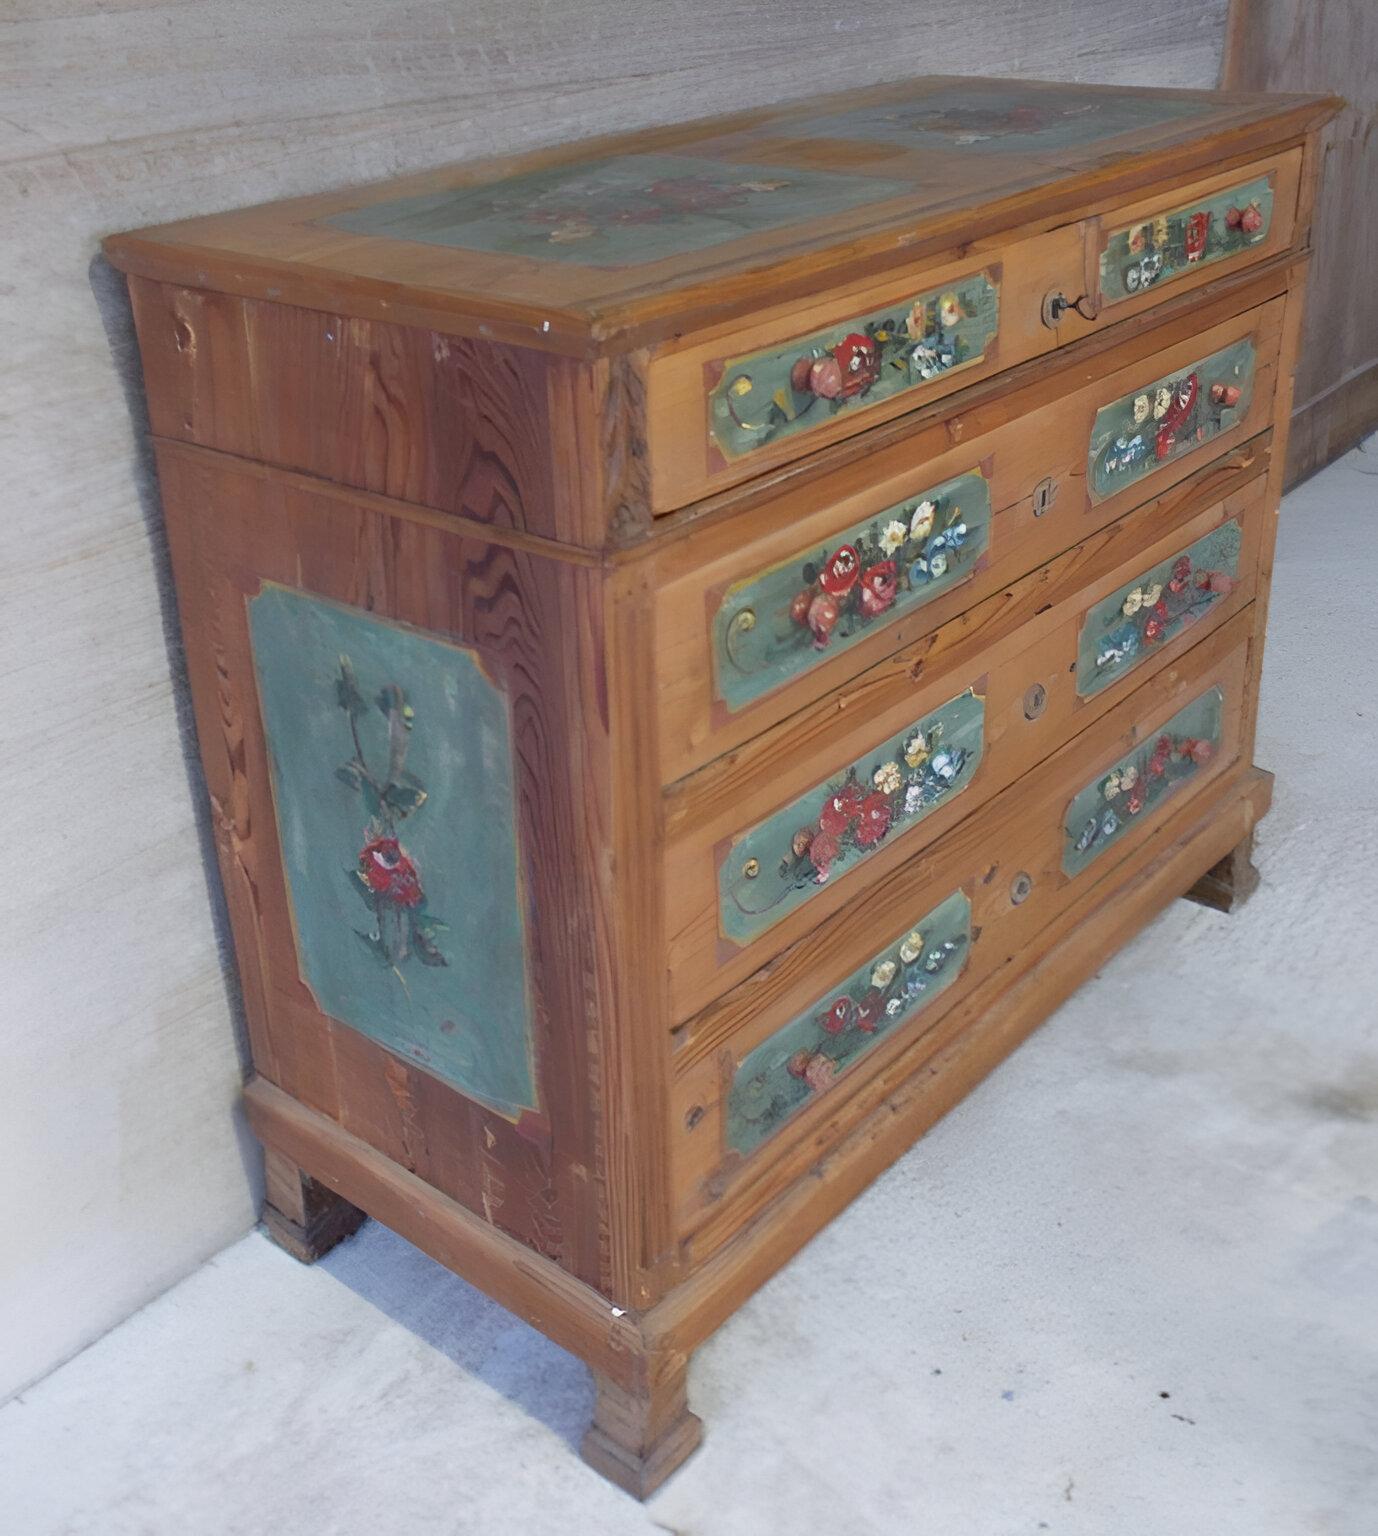 Chest of drawers decorated with red and yellow flowers on a green background in larch wood.
Decorations also on the sides.
Complete hardware.
It has 4 drawers of which the first one is smaller.
Restaurato.

Reference measurements are at the